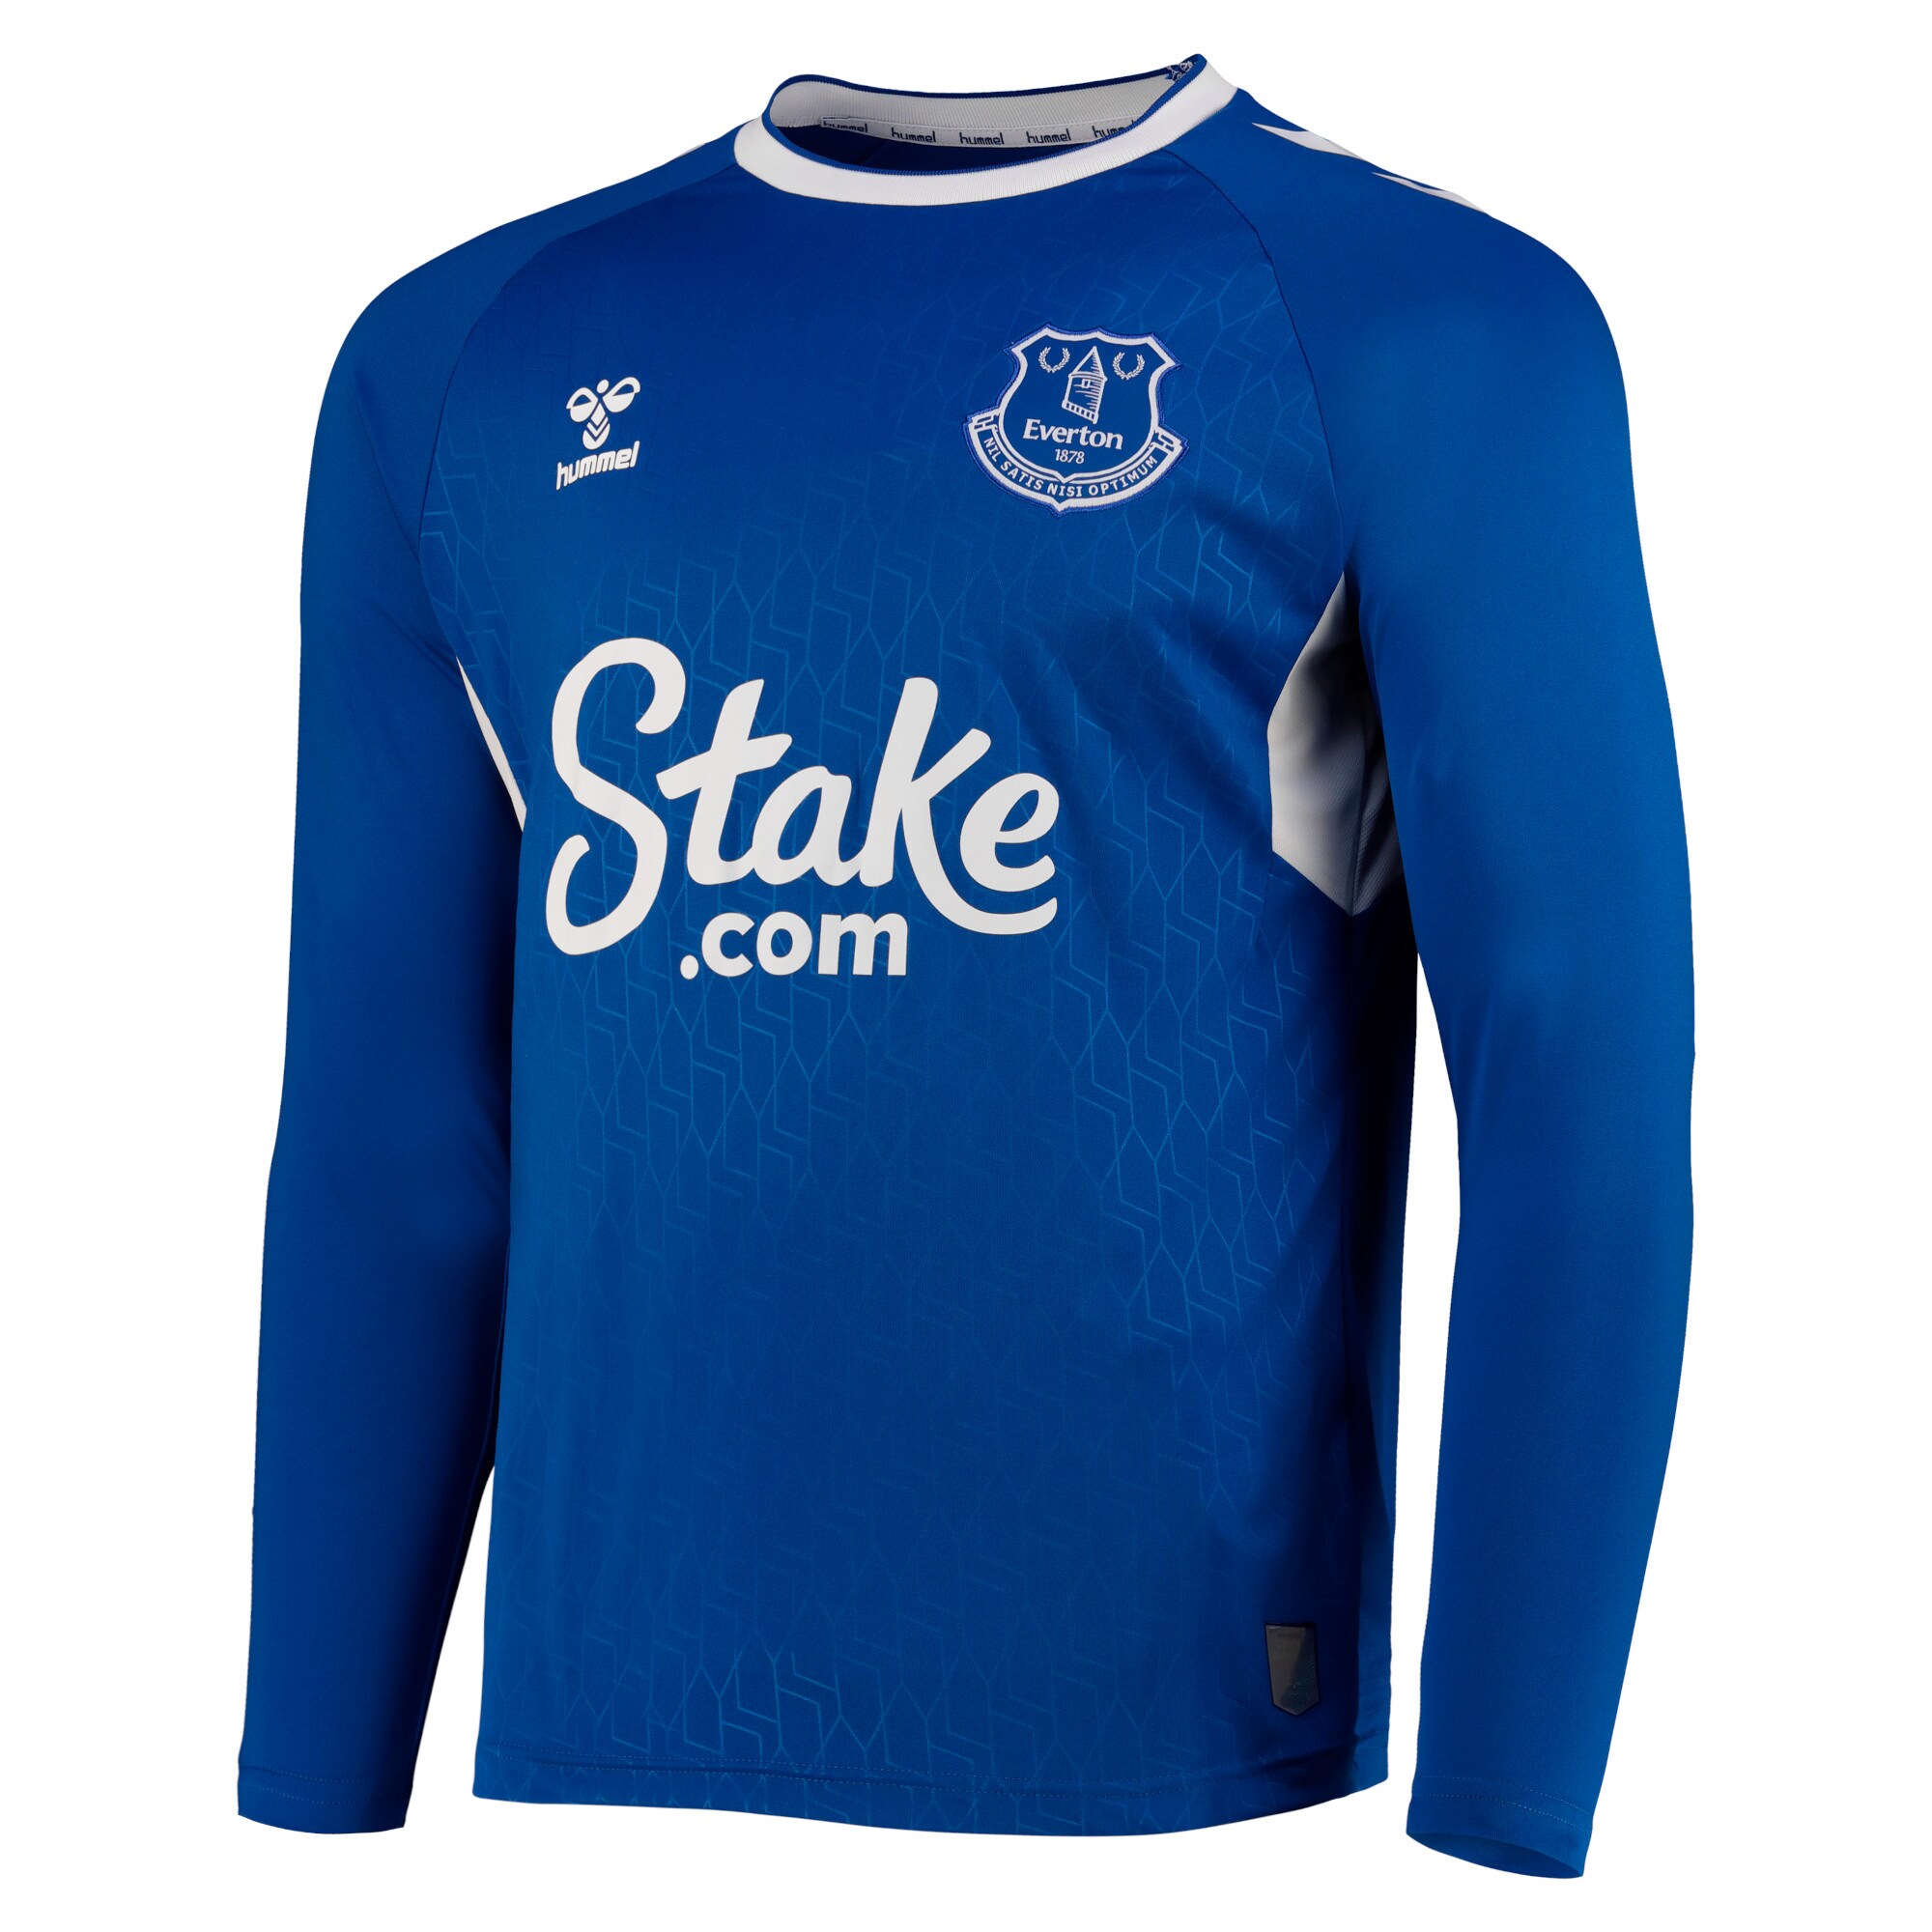 Everton Home Shirt 2022-23 - Long Sleeve with McNeil 7 printing